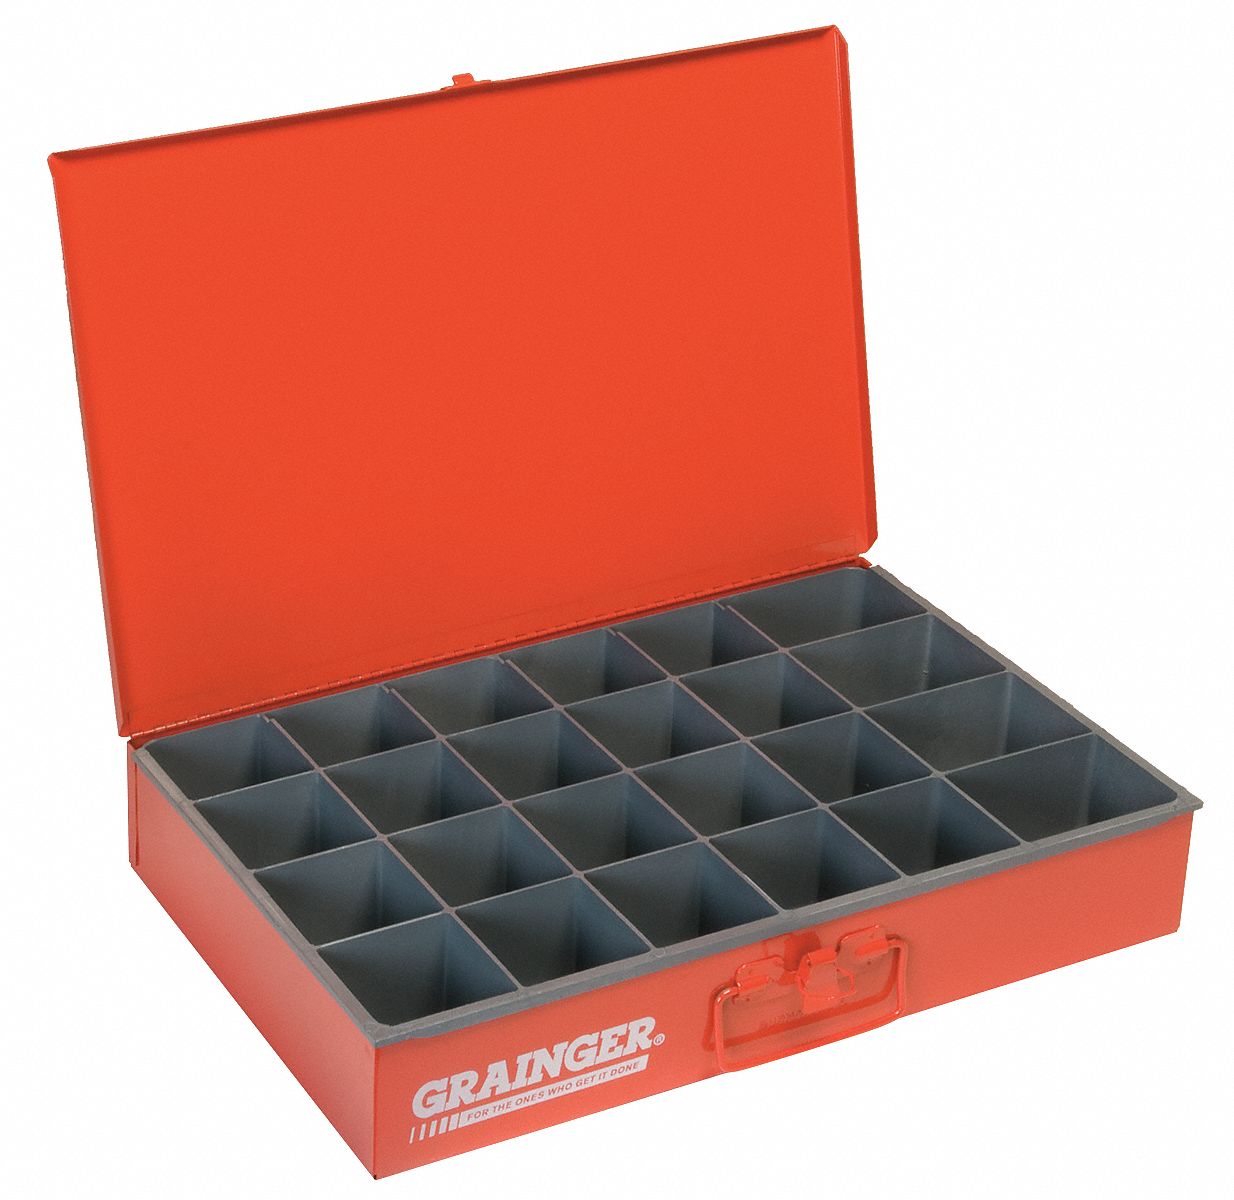 Durham Mfg 102-17-s1158 Steel Compartment Box Red, Size: 12 in